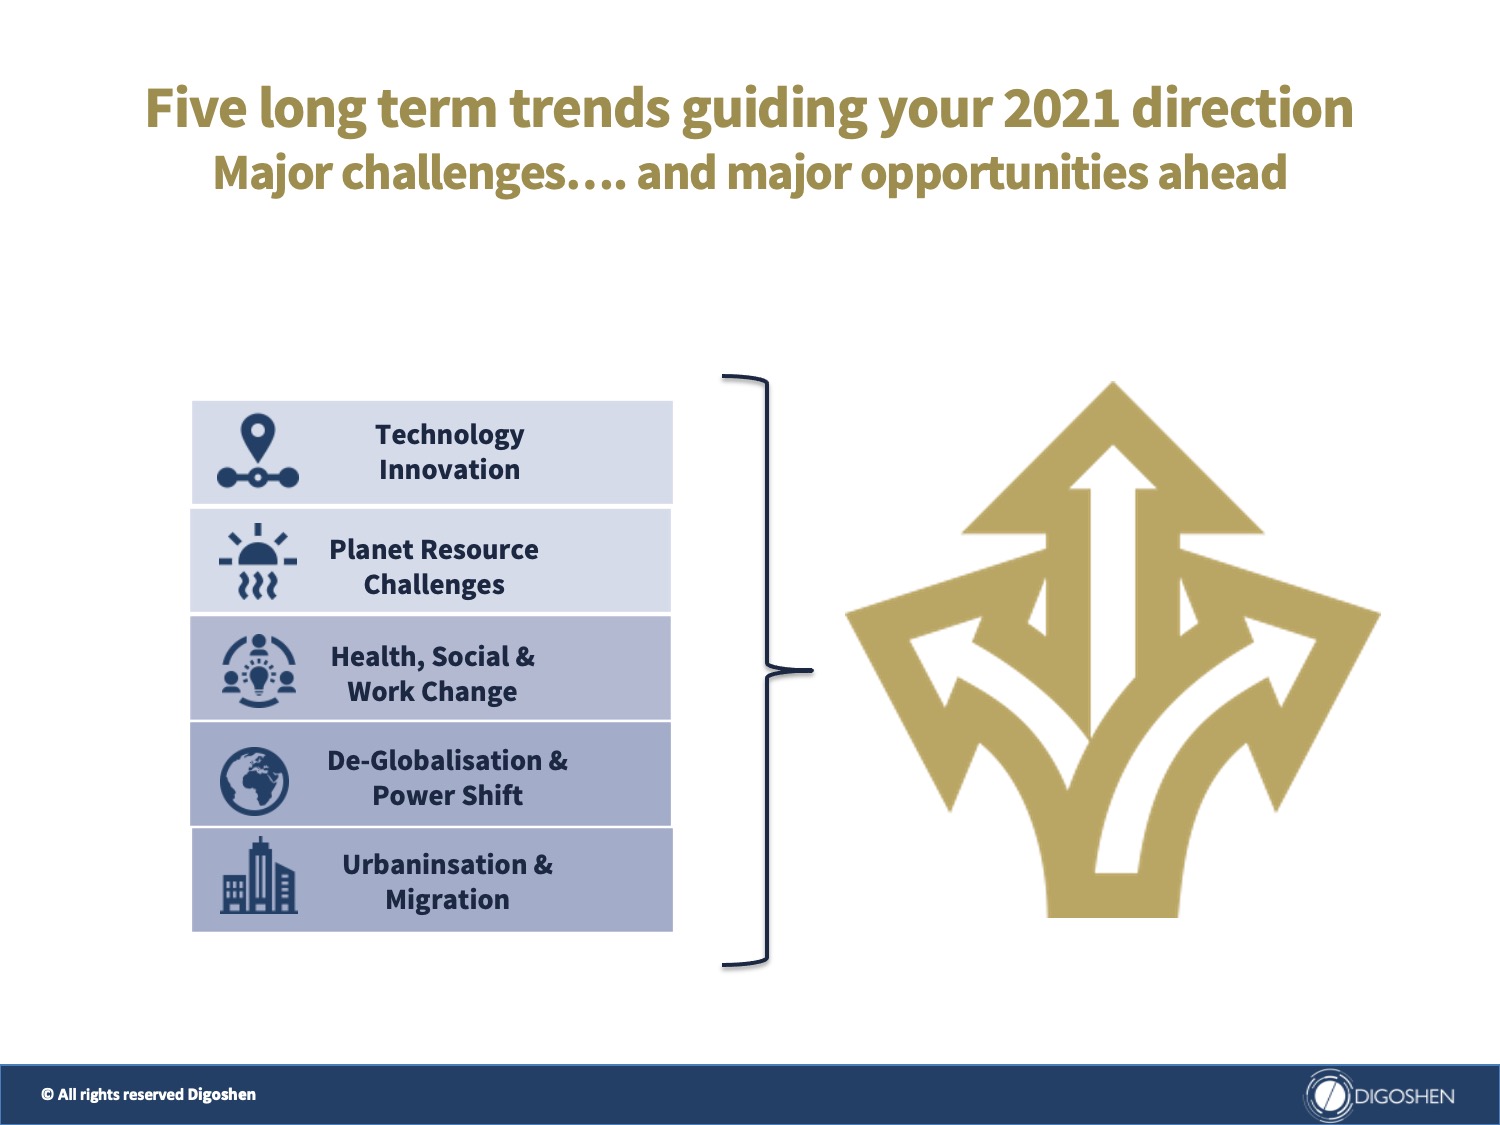 Five trends guiding your direction for 2021